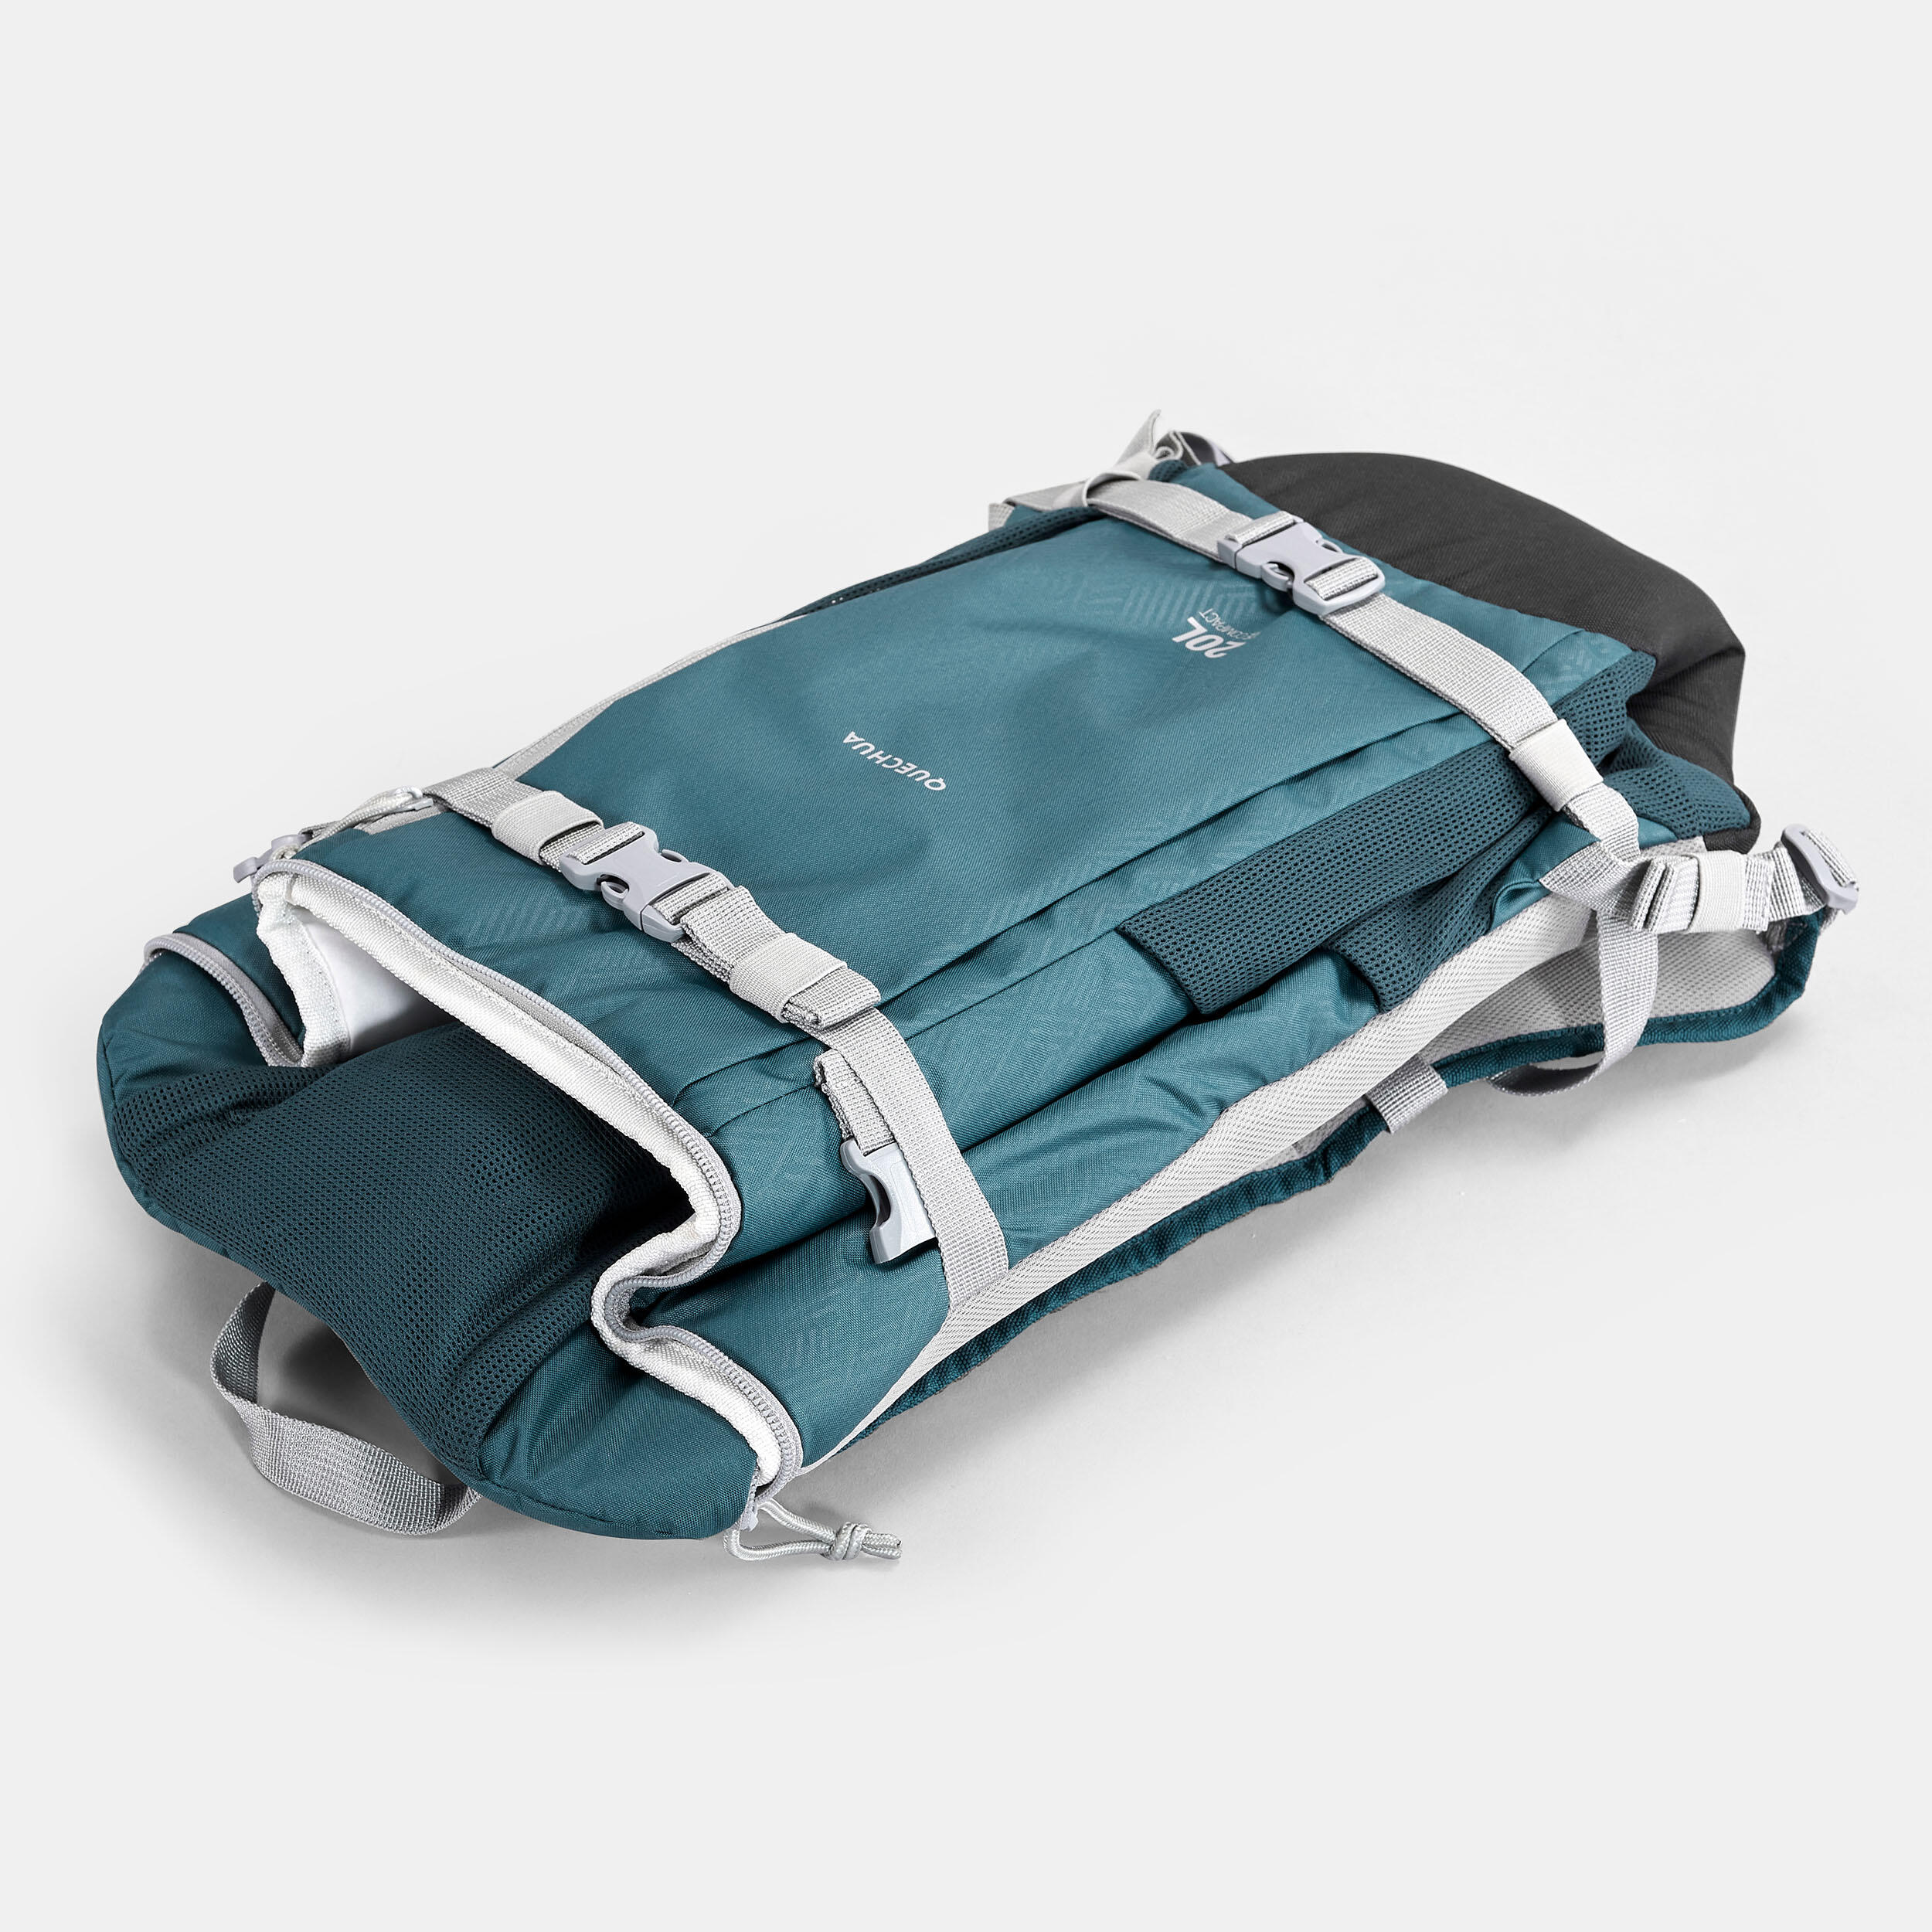 Sac à dos isotherme 10L - NH Ice compact 100 - QUECHUA